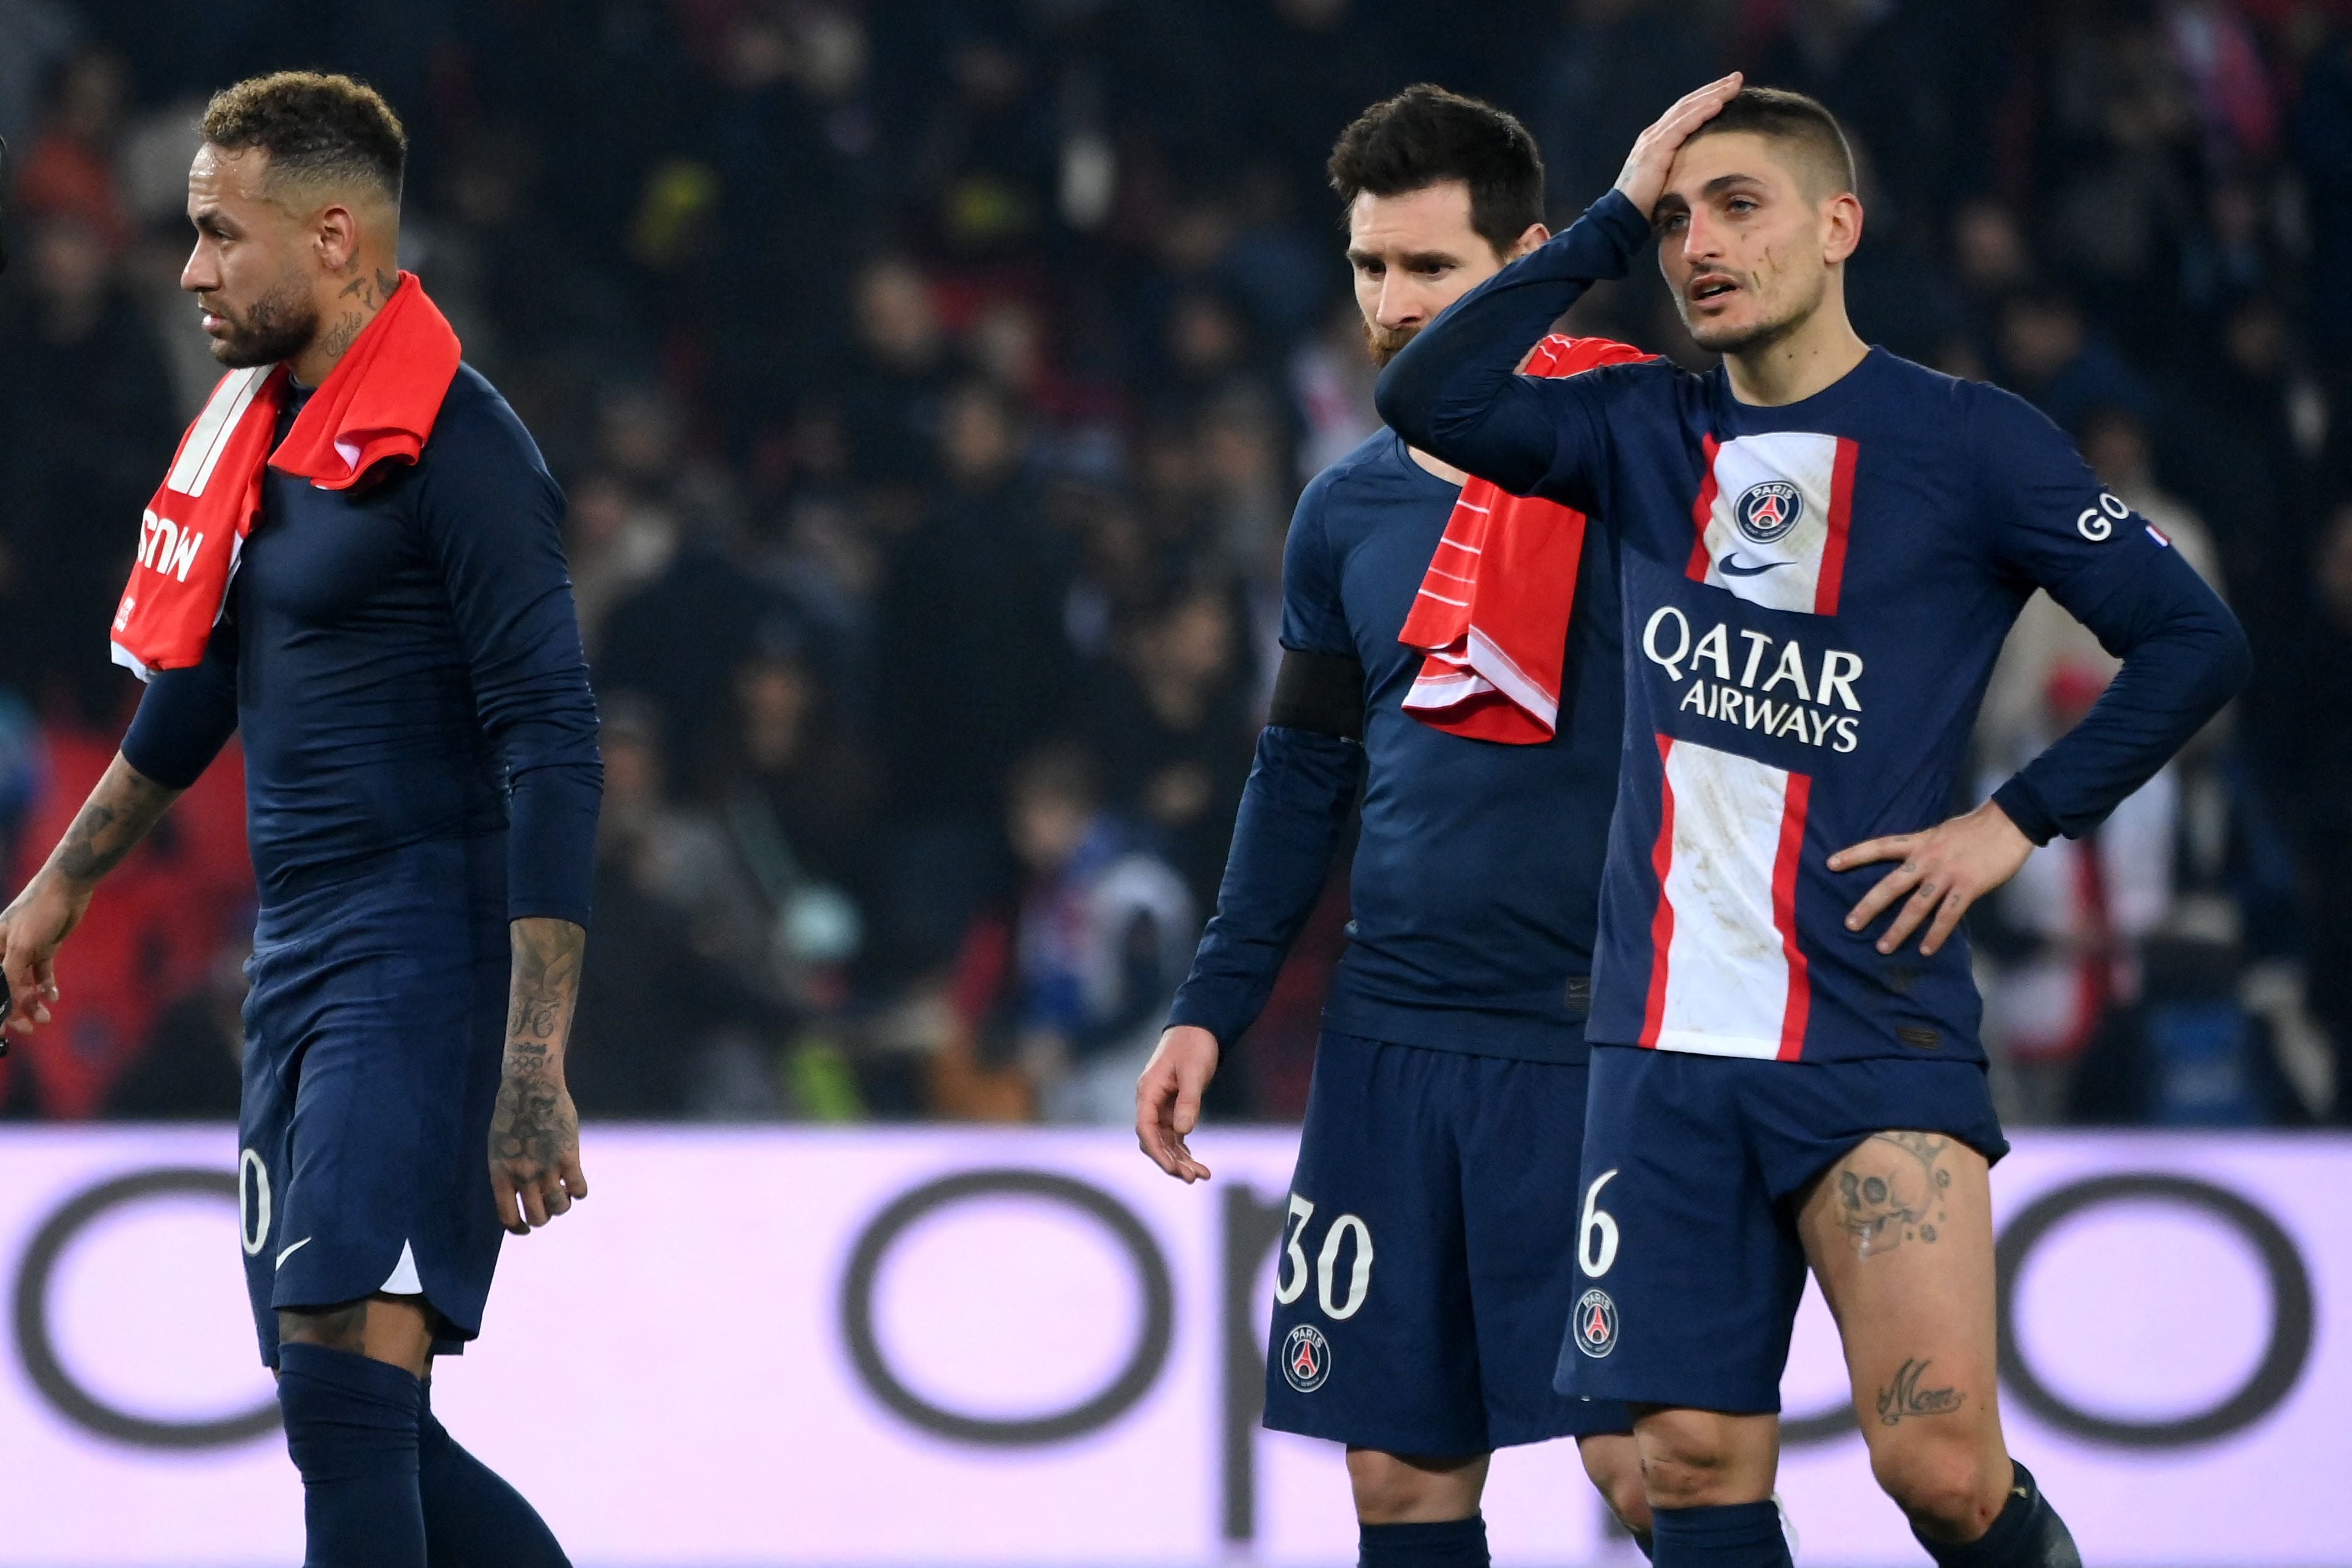 PSG were dismal in defeat to Bayern